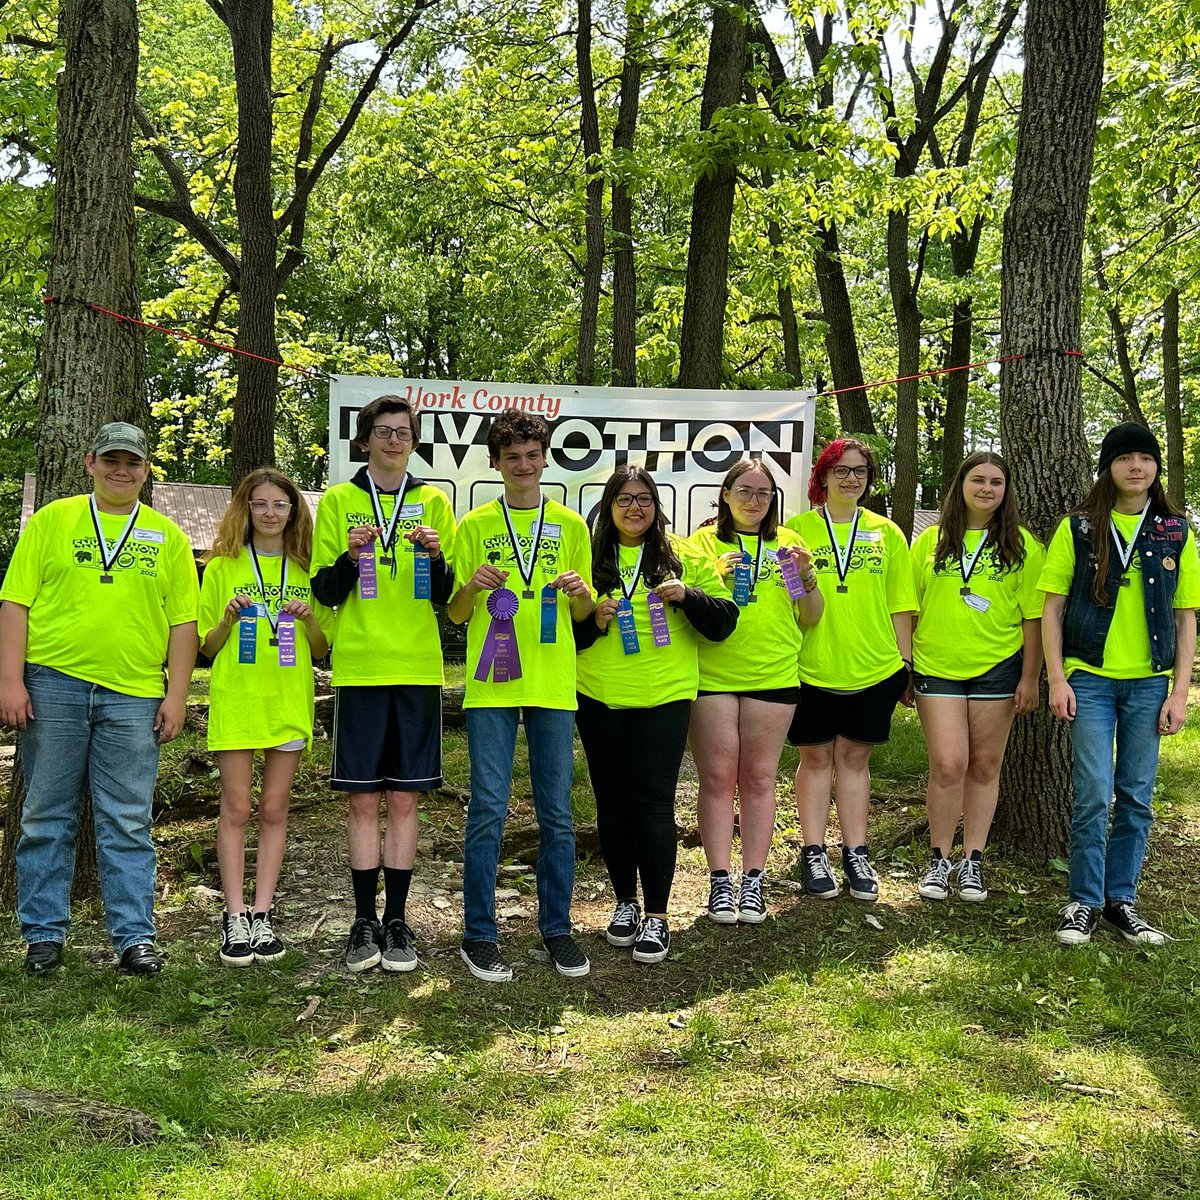 A great day with these students at John Rudy Park for the York County Envirothon. Congratulations to the HMS Trampling Trout Team for winning FIRST PLACE in the forestry category (out of 31 teams) and 7TH PLACE OVERALL. What an achievement! 🏅🌲🌳🍃